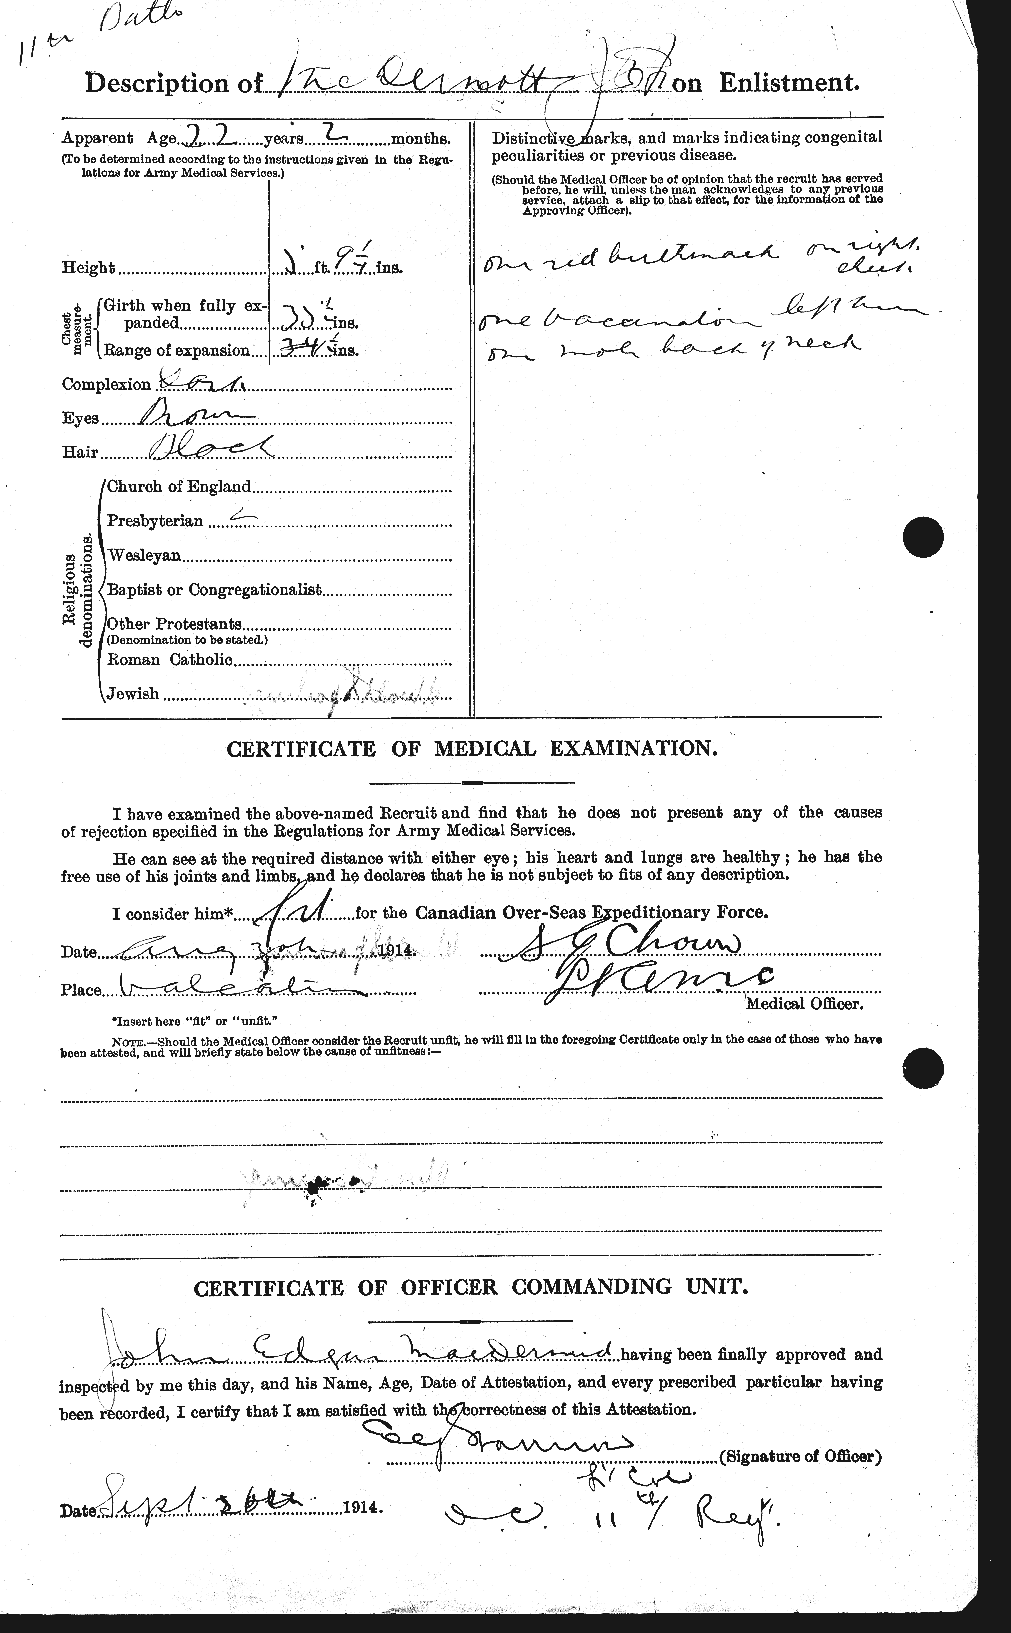 Personnel Records of the First World War - CEF 135813b